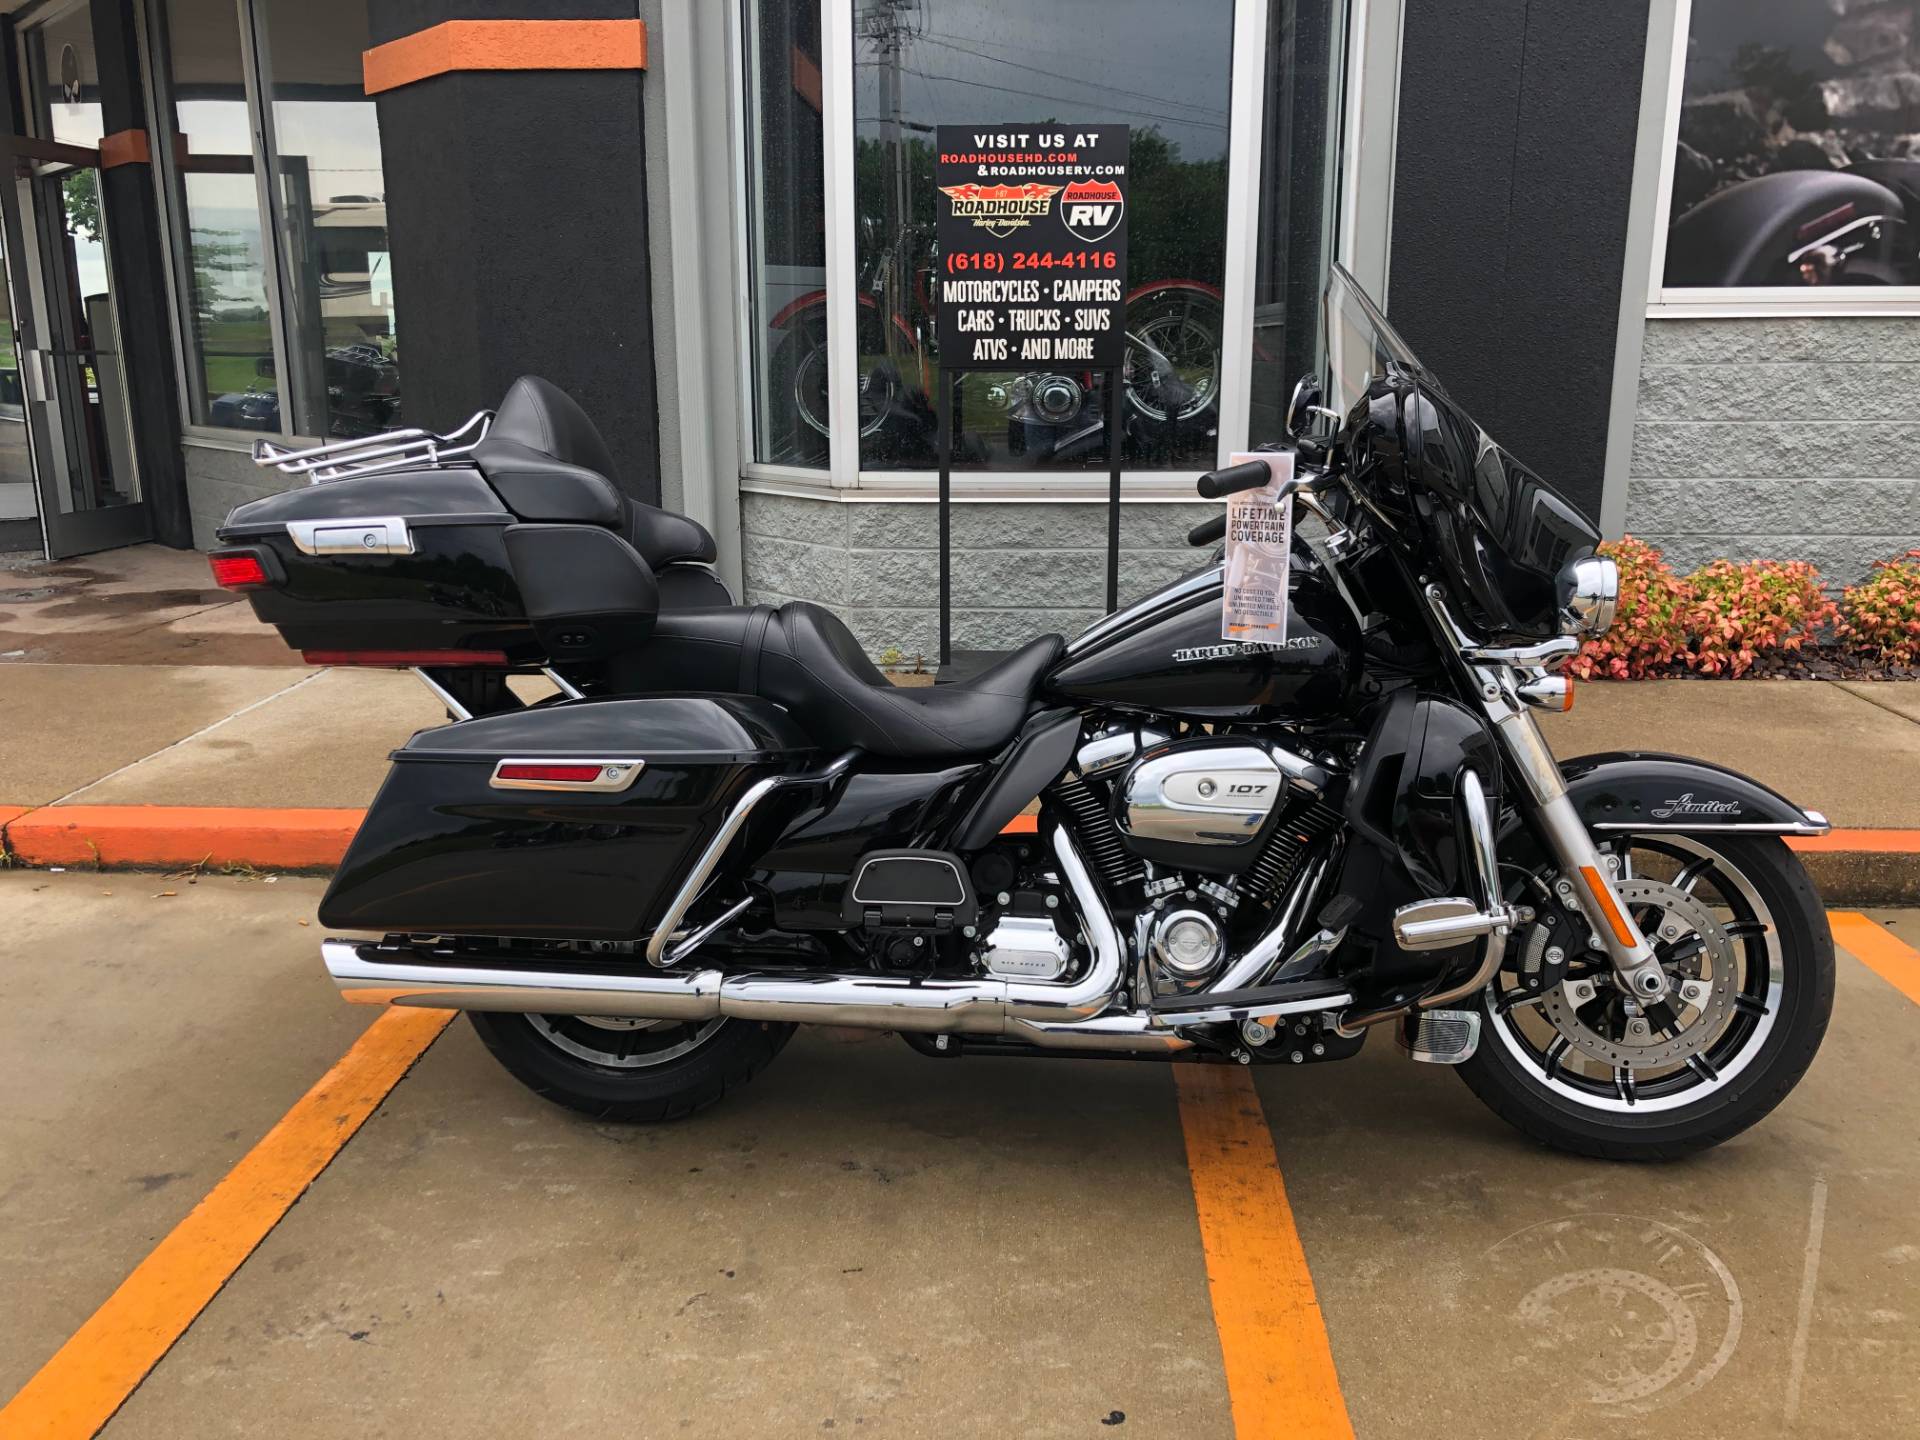 used 2018 harley davidson electra glide ultra classic vivid black motorcycles in marion il 637028 2018 harley davidson electra glide ultra classic in mount vernon illinois